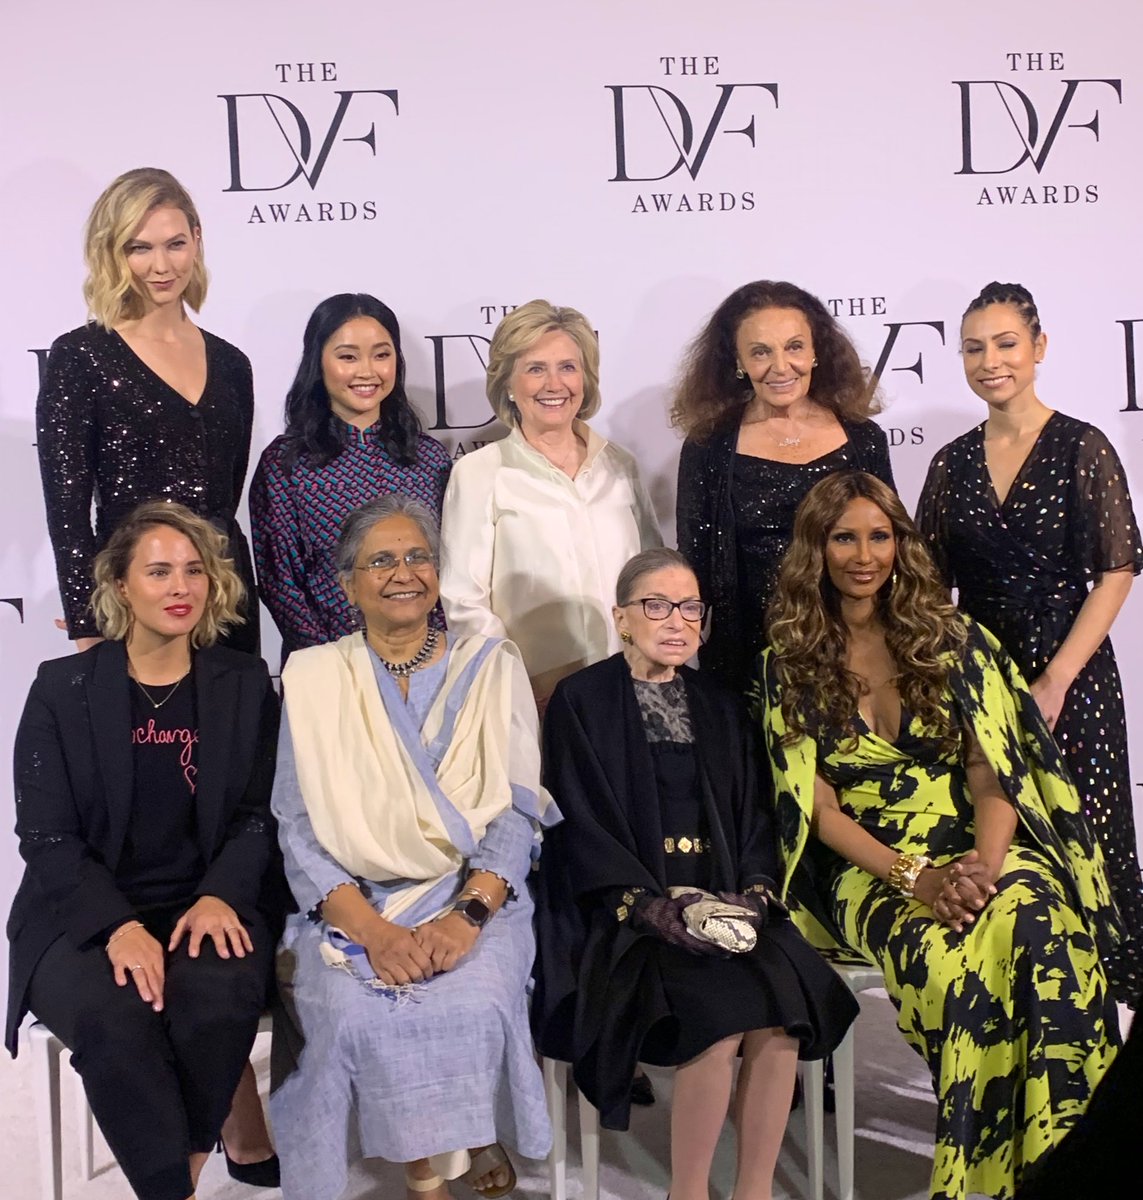 Started our morning in Puerto Rico with the @ClintonFdn and now we’re in Washington D.C. for the 11th Annual #DVFAwards. @HillaryClinton is honoring Justice Ruth Bader Ginsburg.